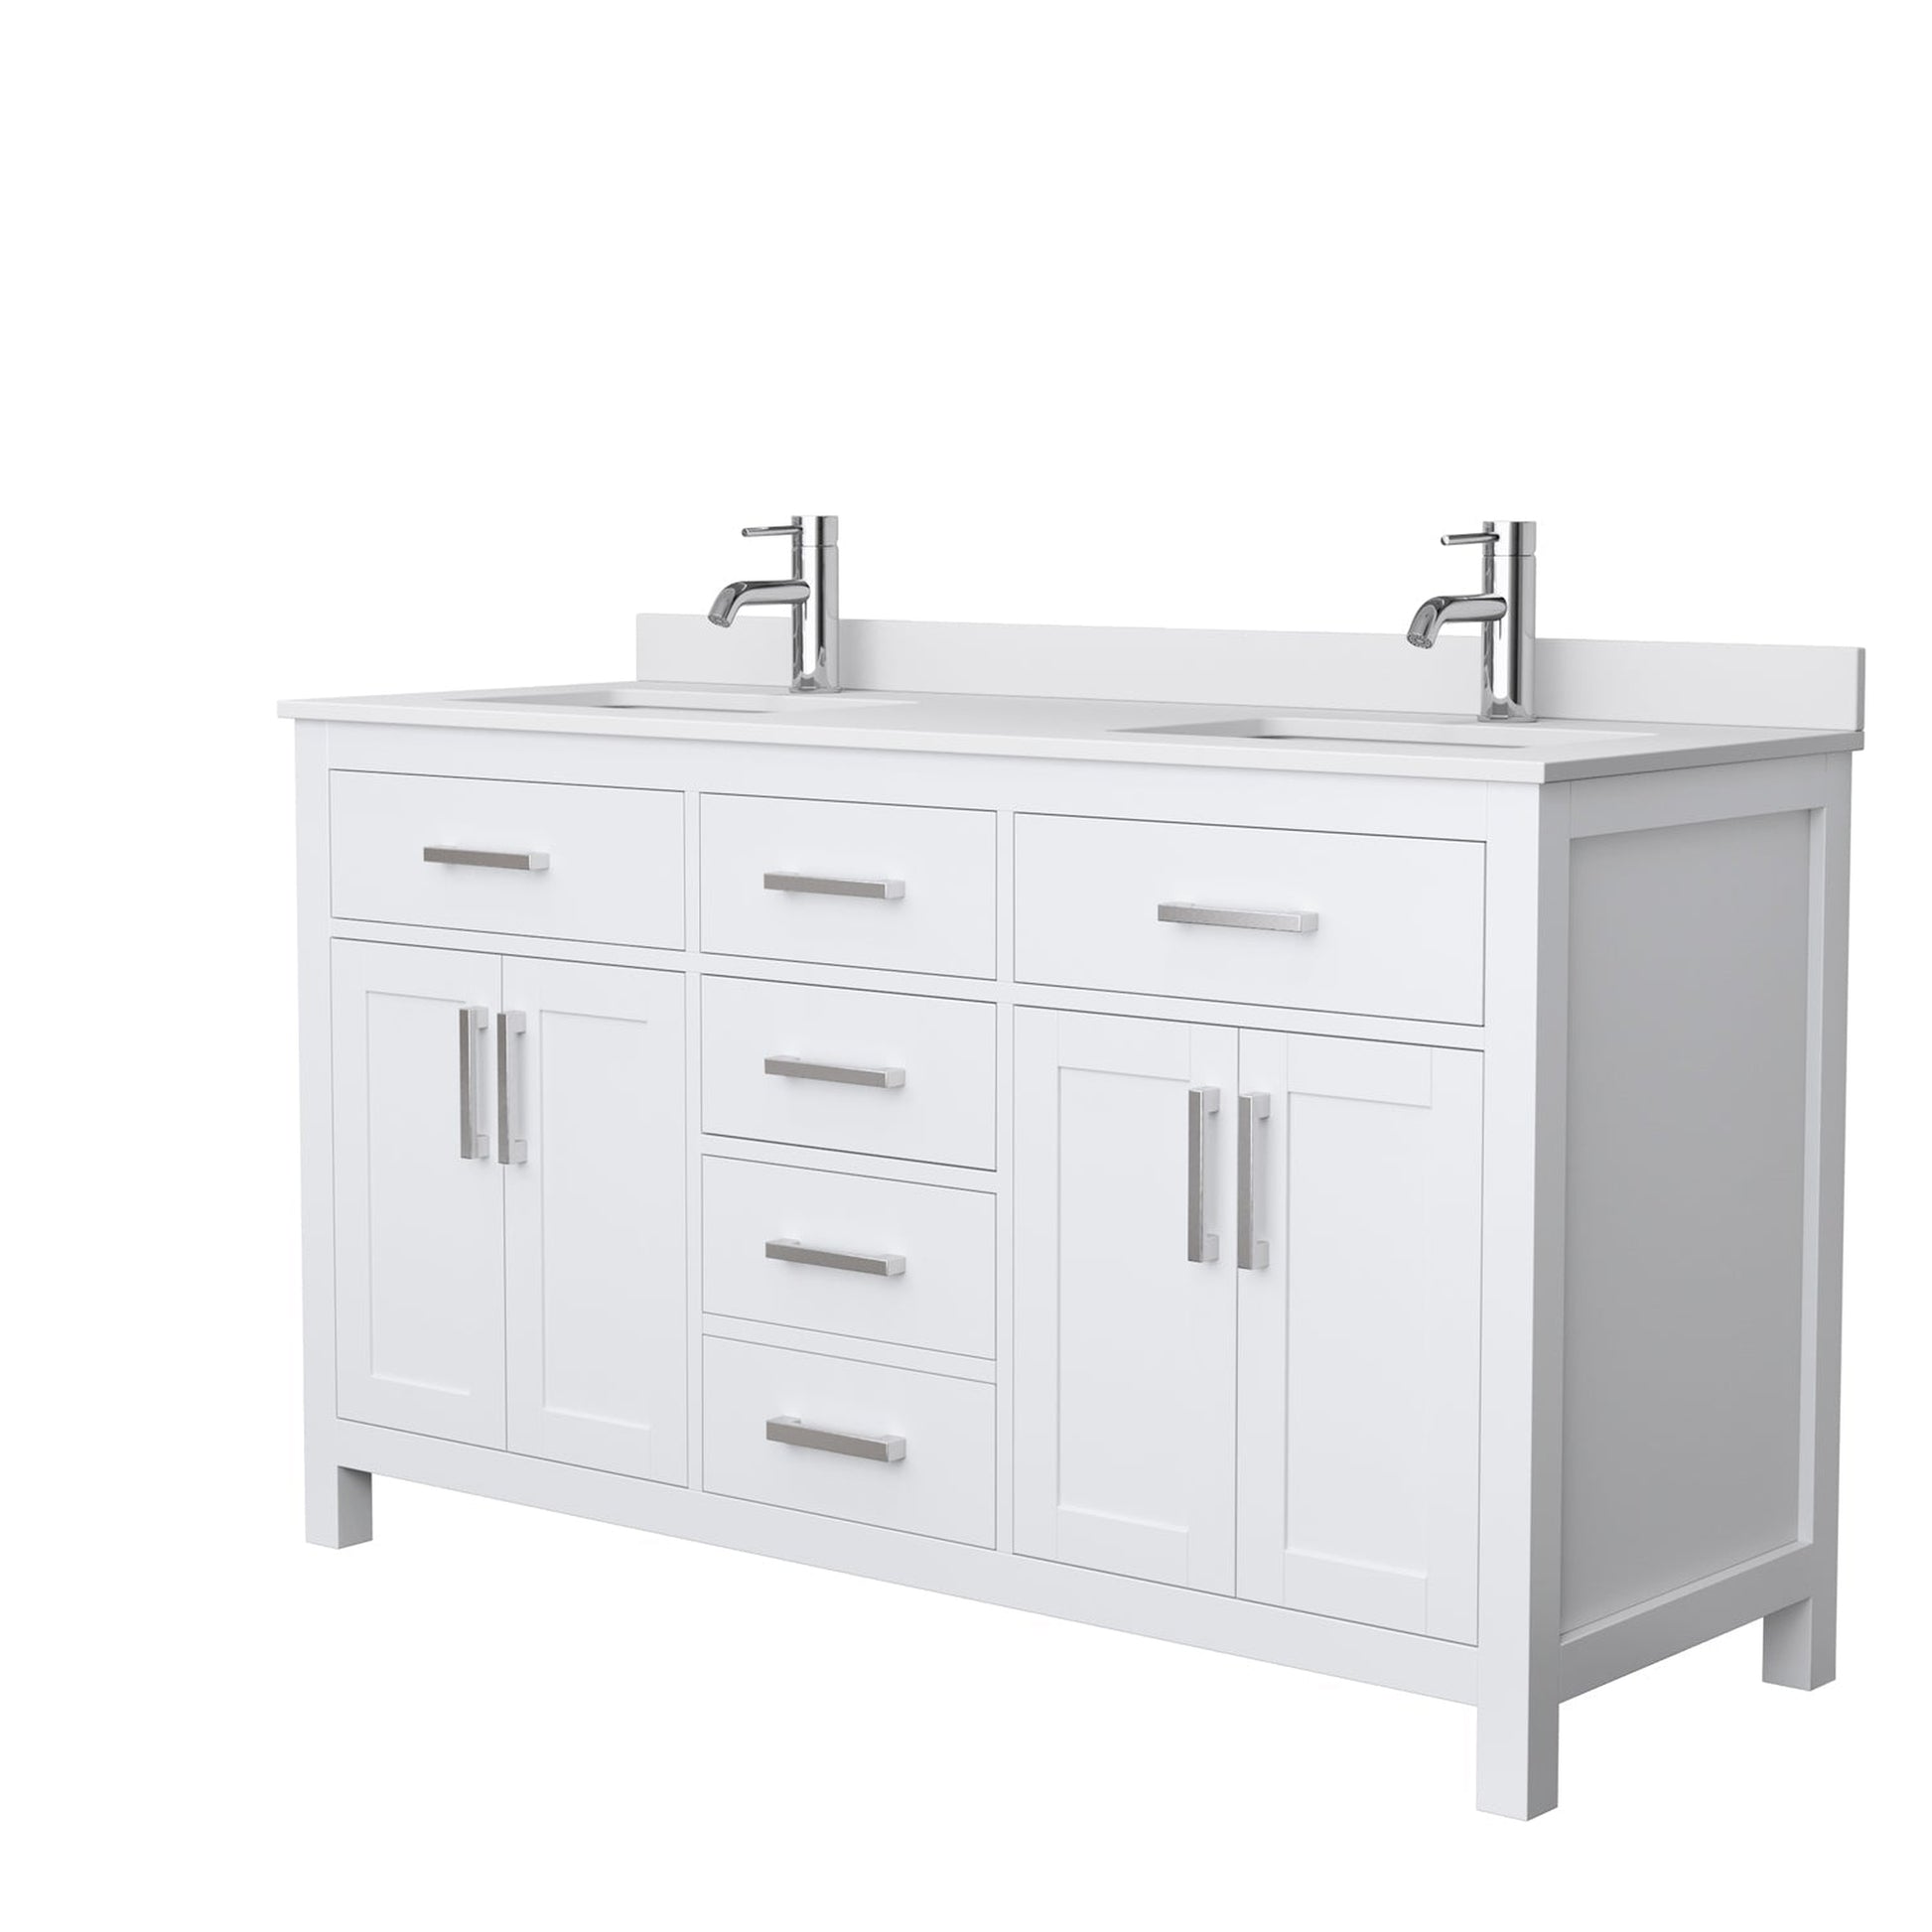 Wyndham Collection Beckett 60" Double Bathroom White Vanity With White Cultured Marble Countertop, Undermount Square Sink And Brushed Nickel Trim